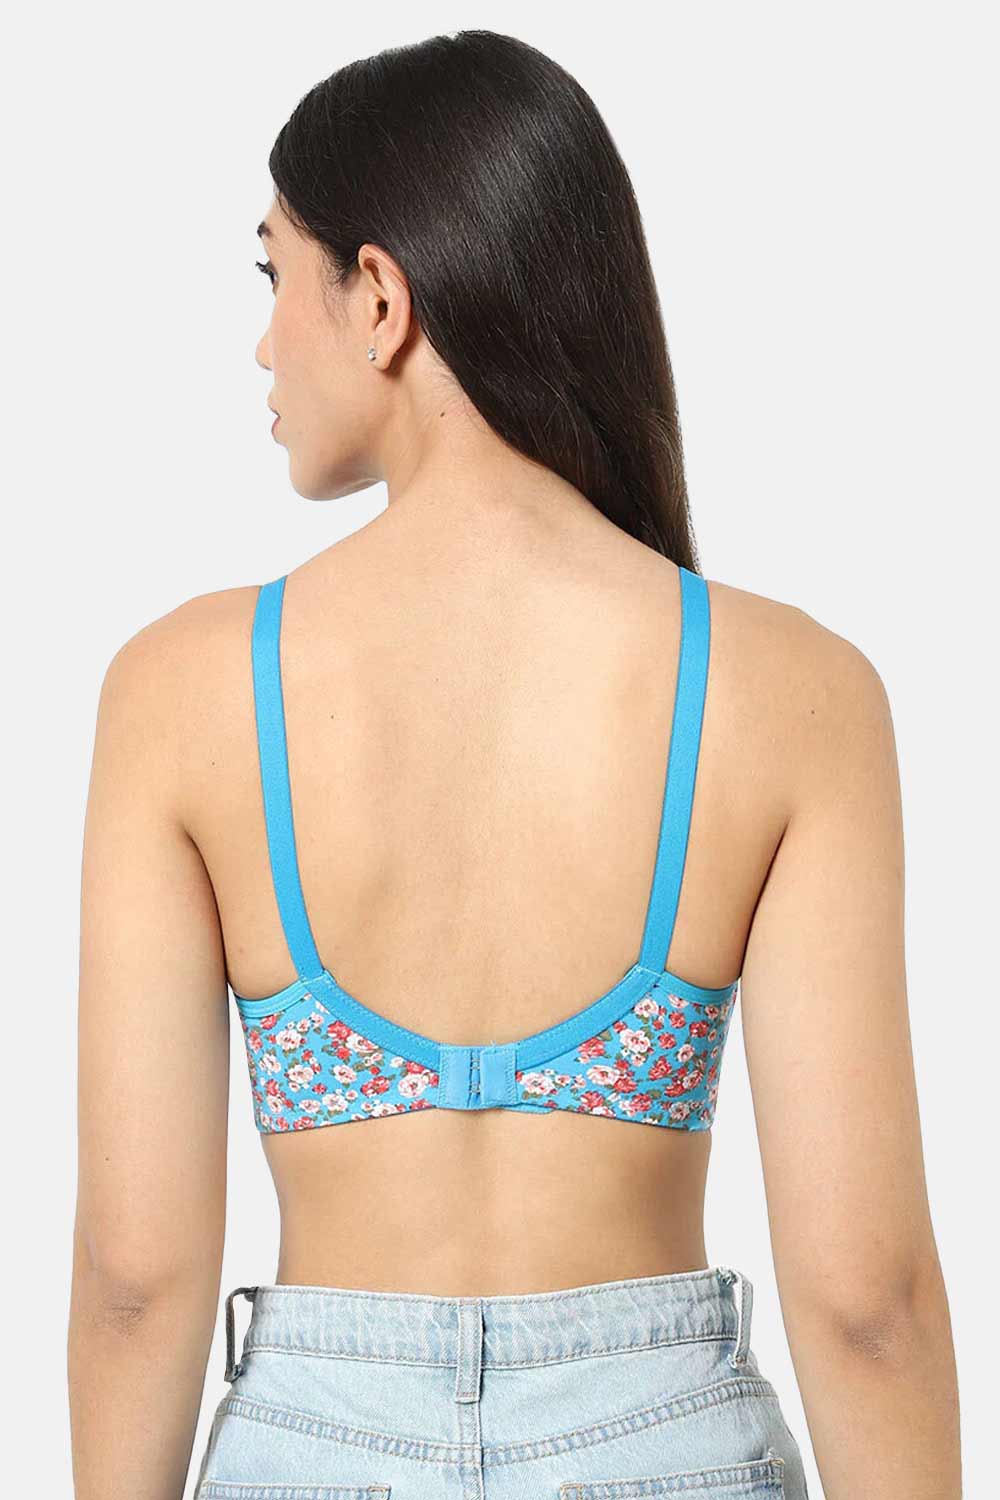 Intimacy High Coverage Cotton Blend  Non-Wired  T-Shirt Saree Bra- Light blue print